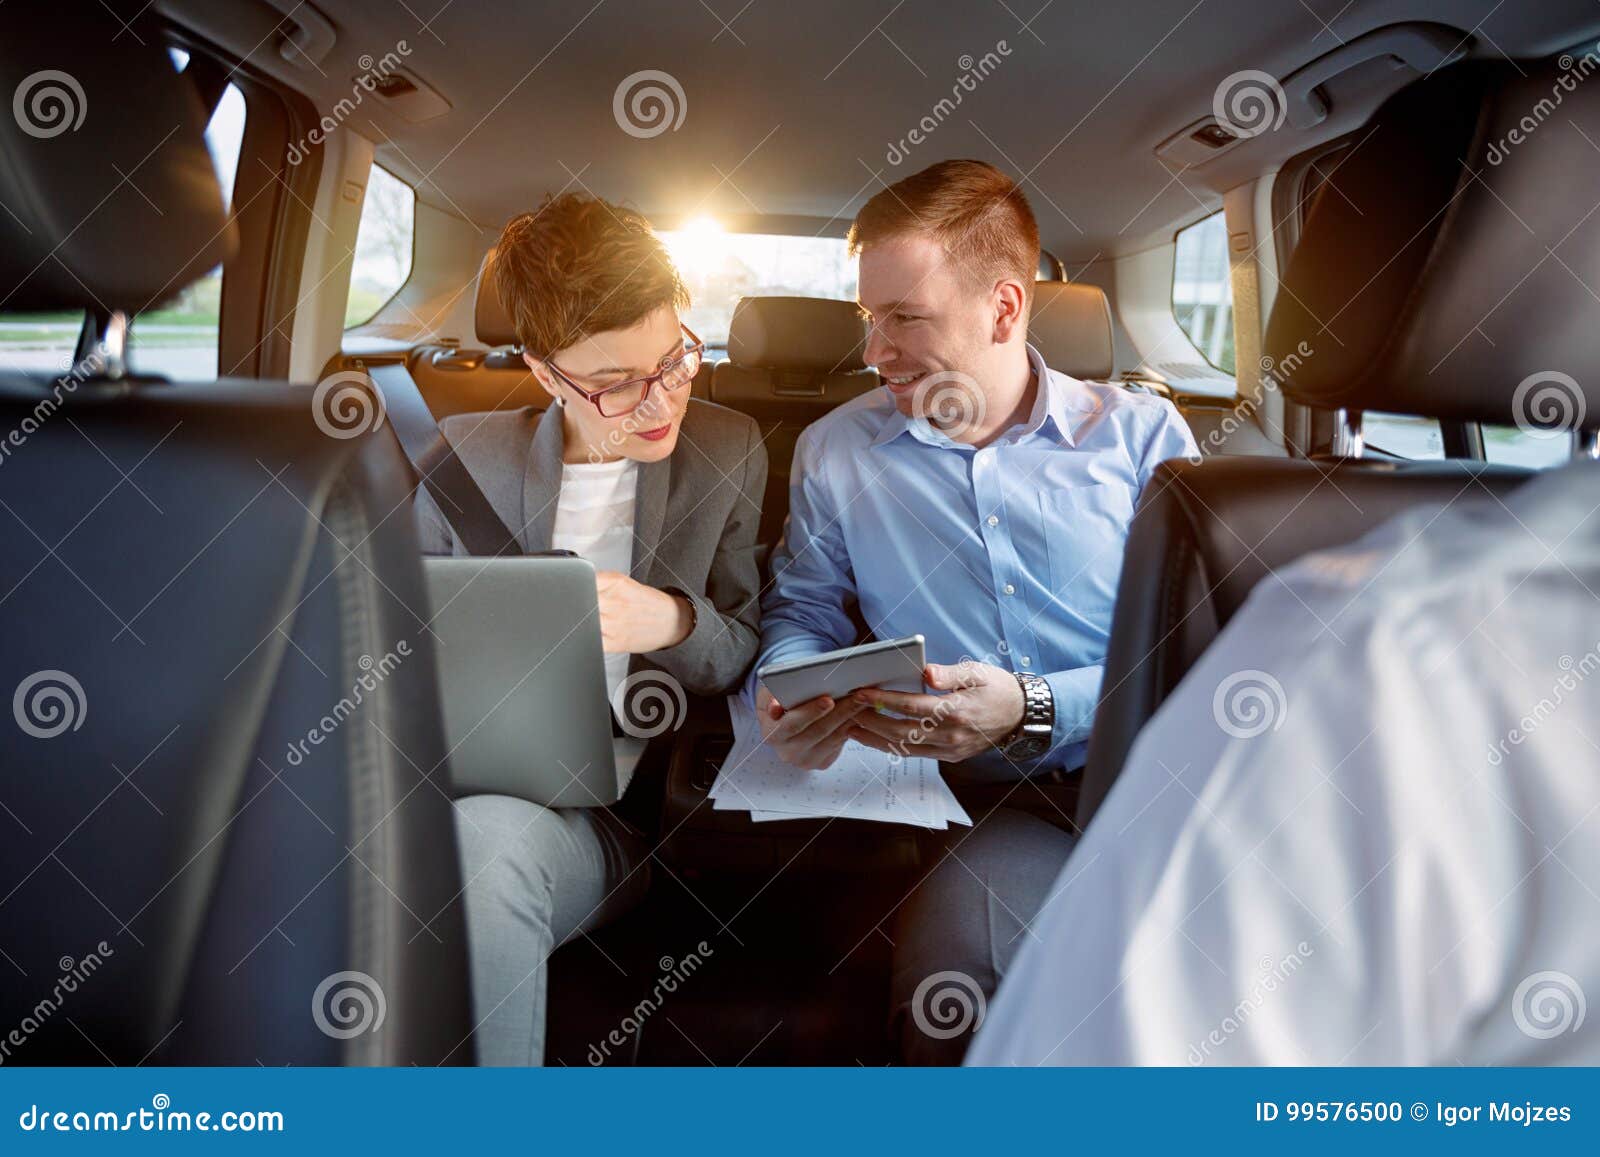 business team in the car on business trip